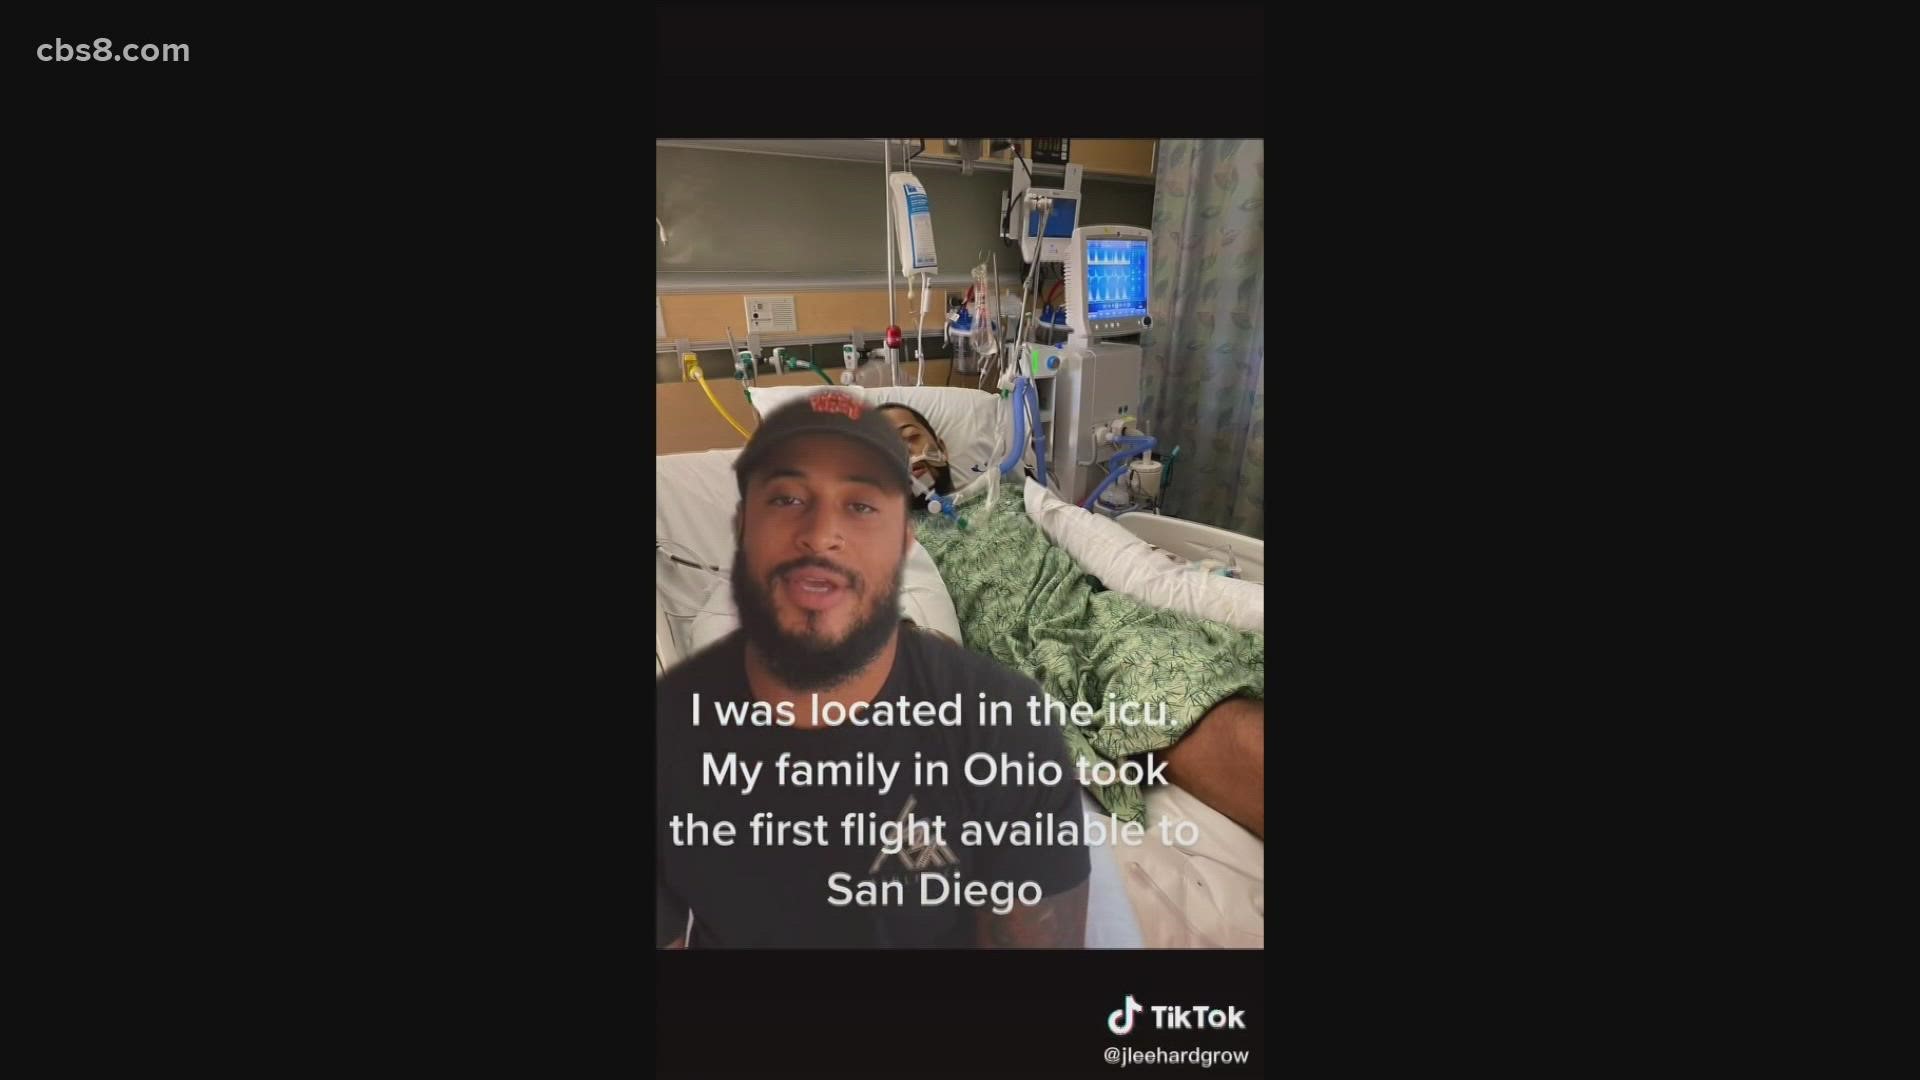 Jordan’s TikTok post has been shared over 200,000 times. Follow his recovery journey.